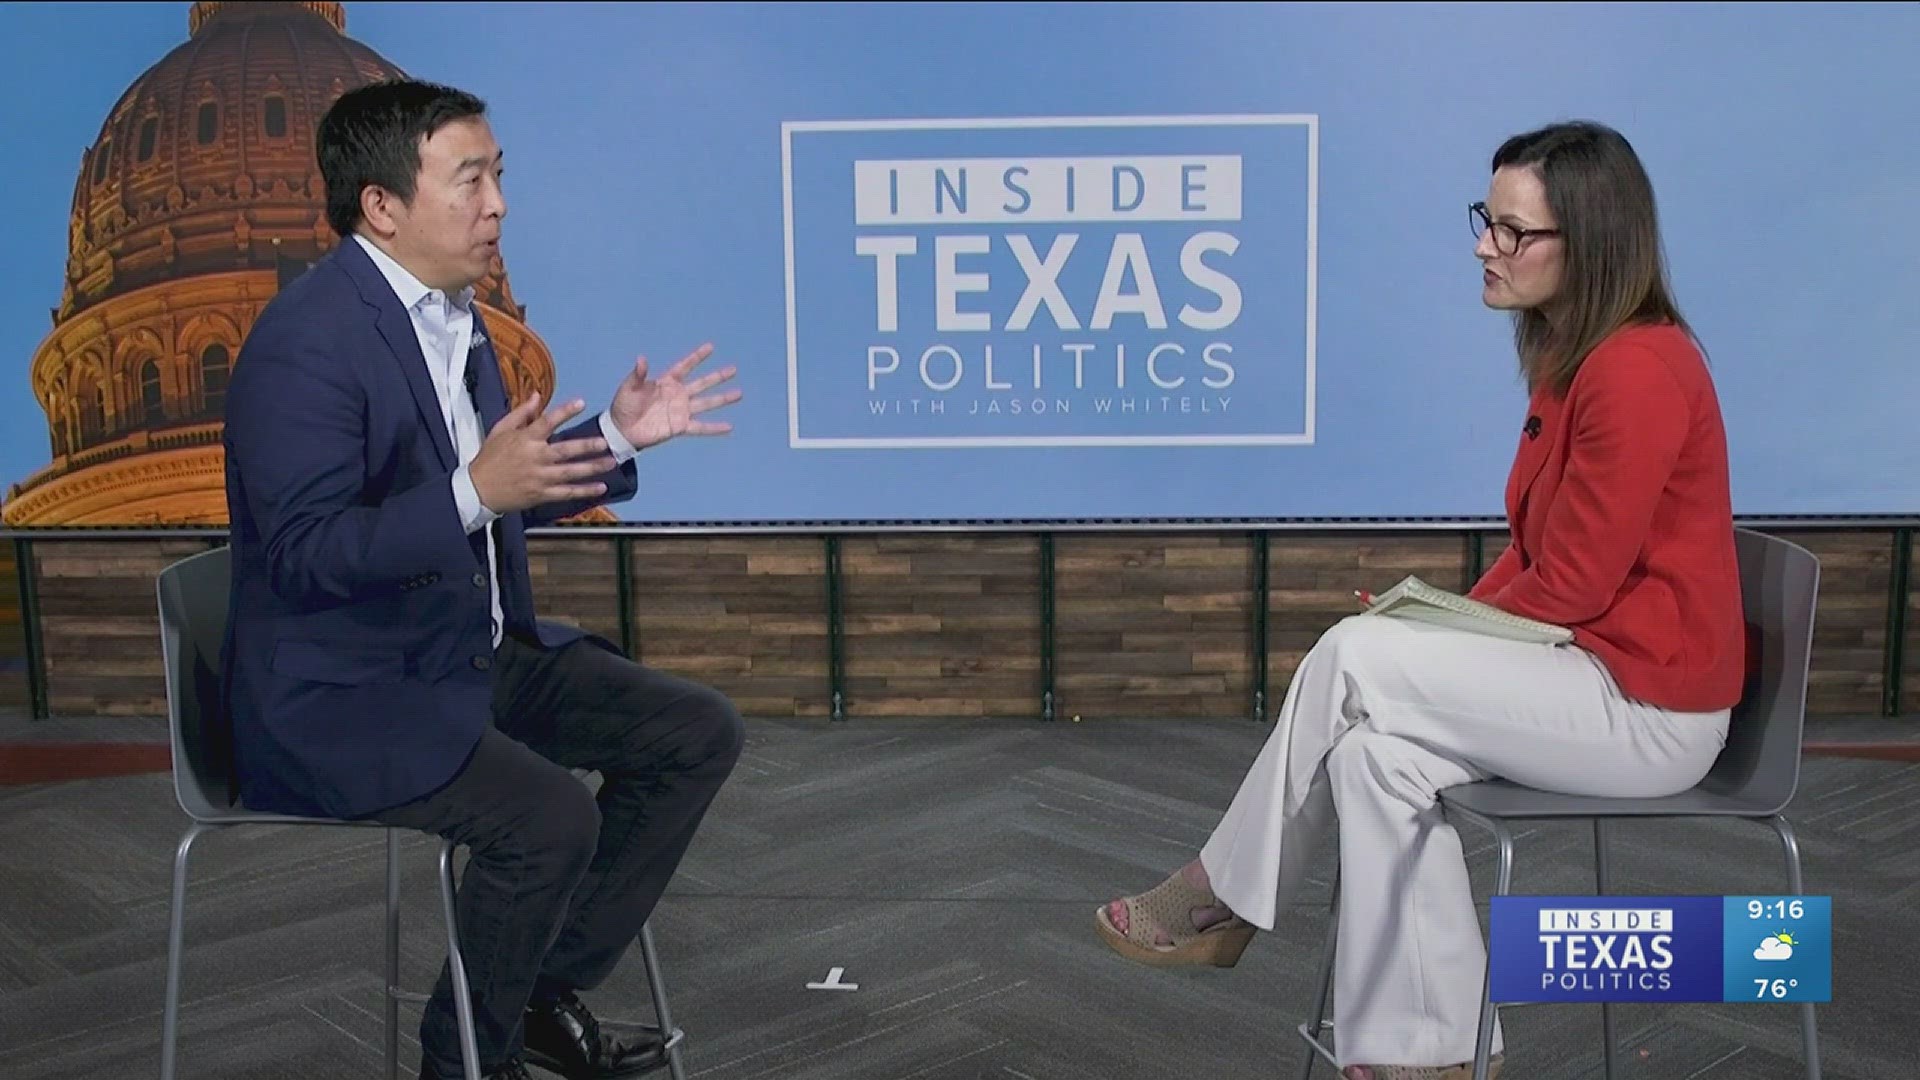 The Forward Party founder, former Democratic Presidential candidate Andrew Yang, says they’ve already seen an influx of hundreds of thousands of dollars.